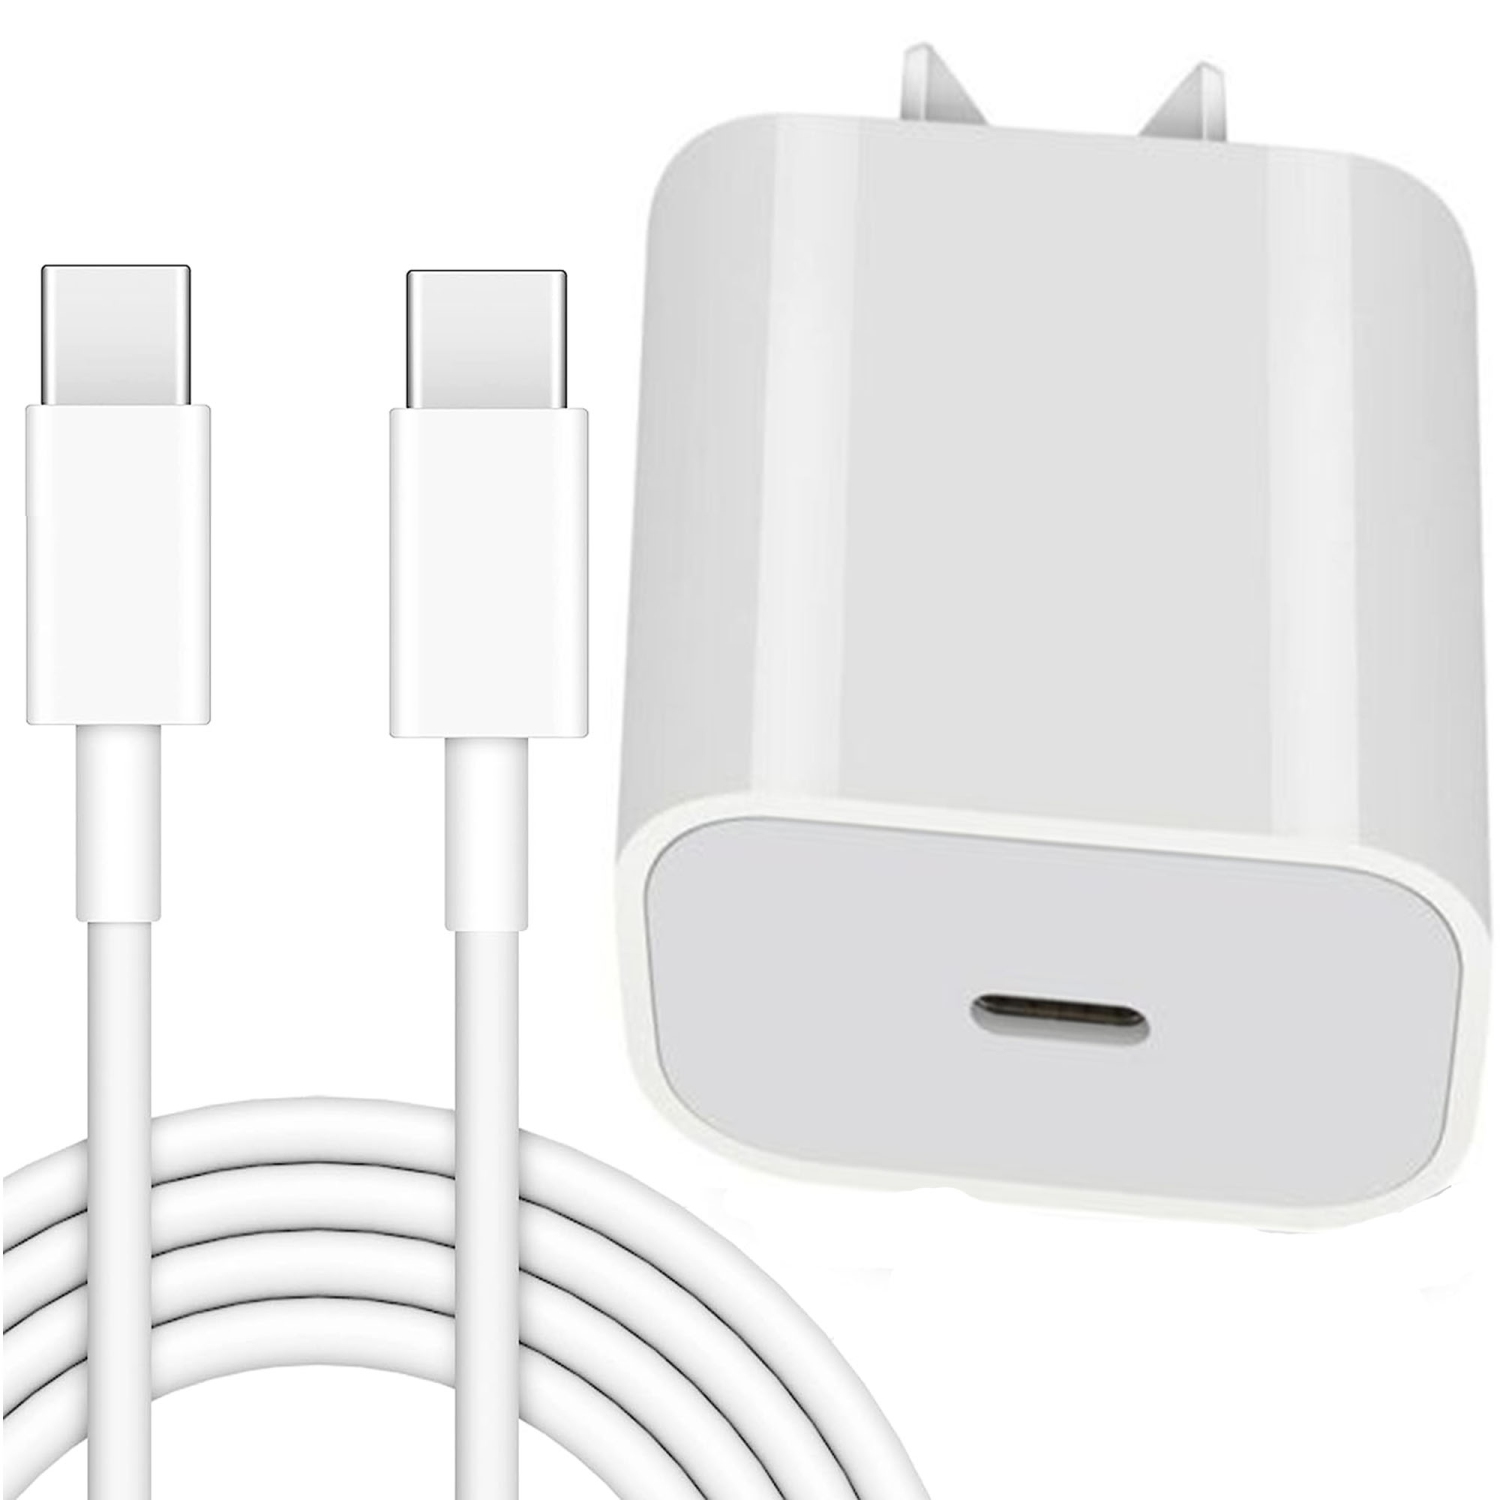 Samsung Galaxy USB-C Super Fast Charging Wall Charger Adapter with 1m Type-C Cable For Galaxy S23 S22 S20 S21 Plus Ultra S20FE, S10, S10+, NOTE 10 20 A73 A53 A54 A72 A32